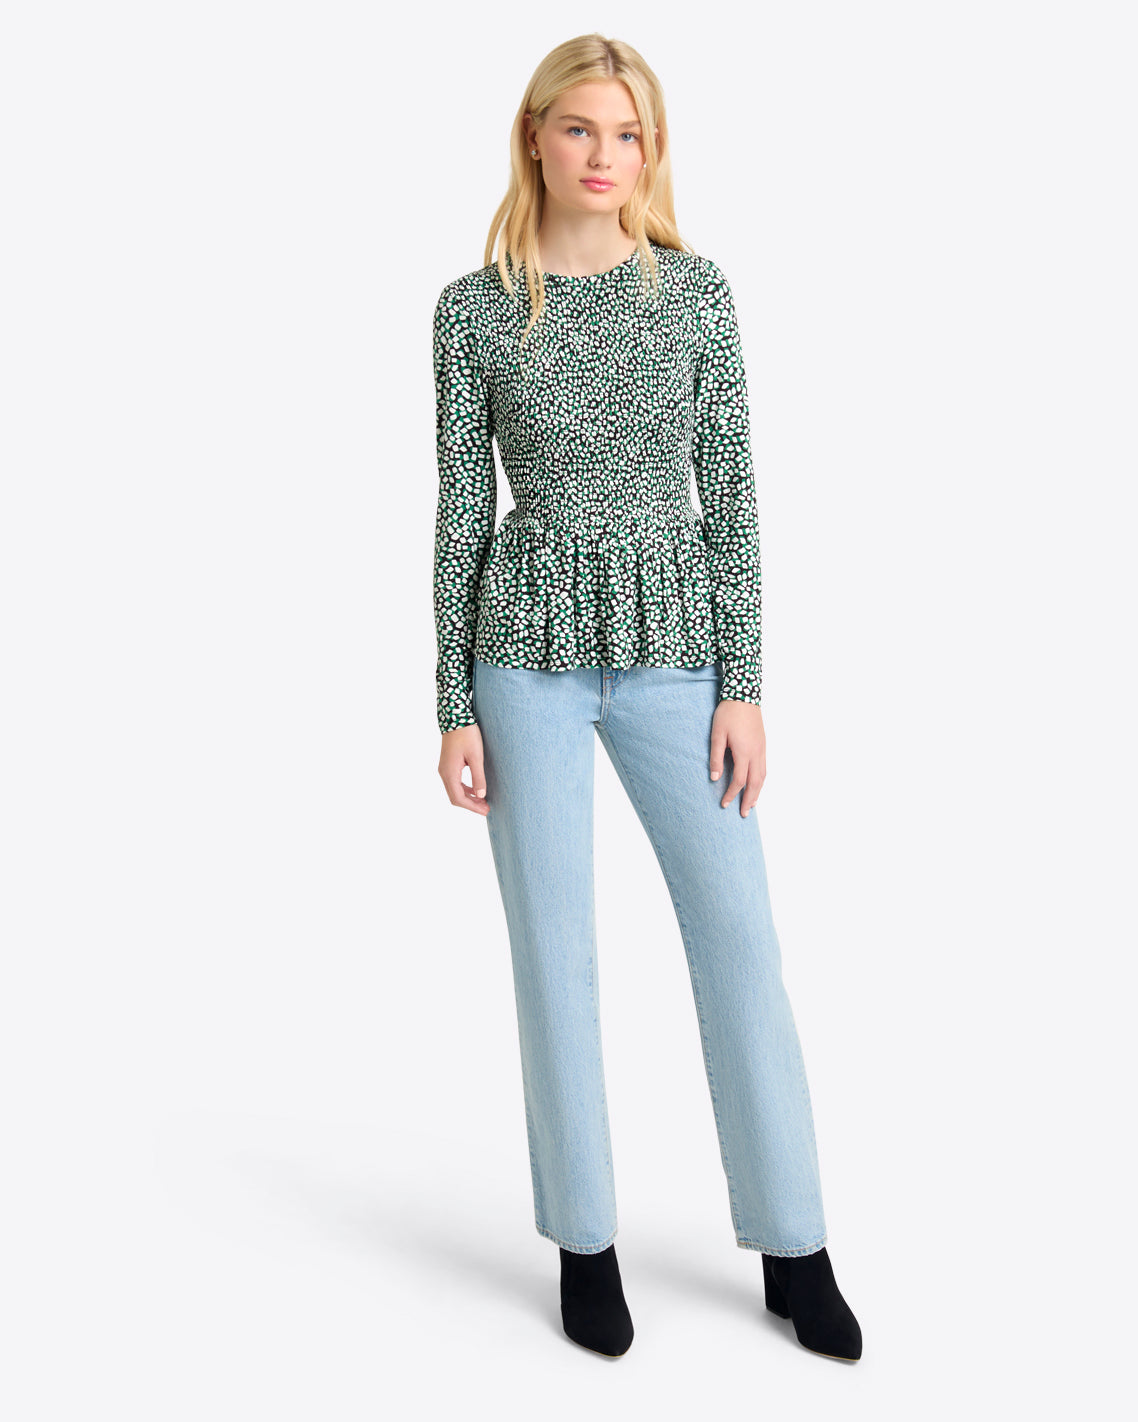 Abby Top in Green Square Dot